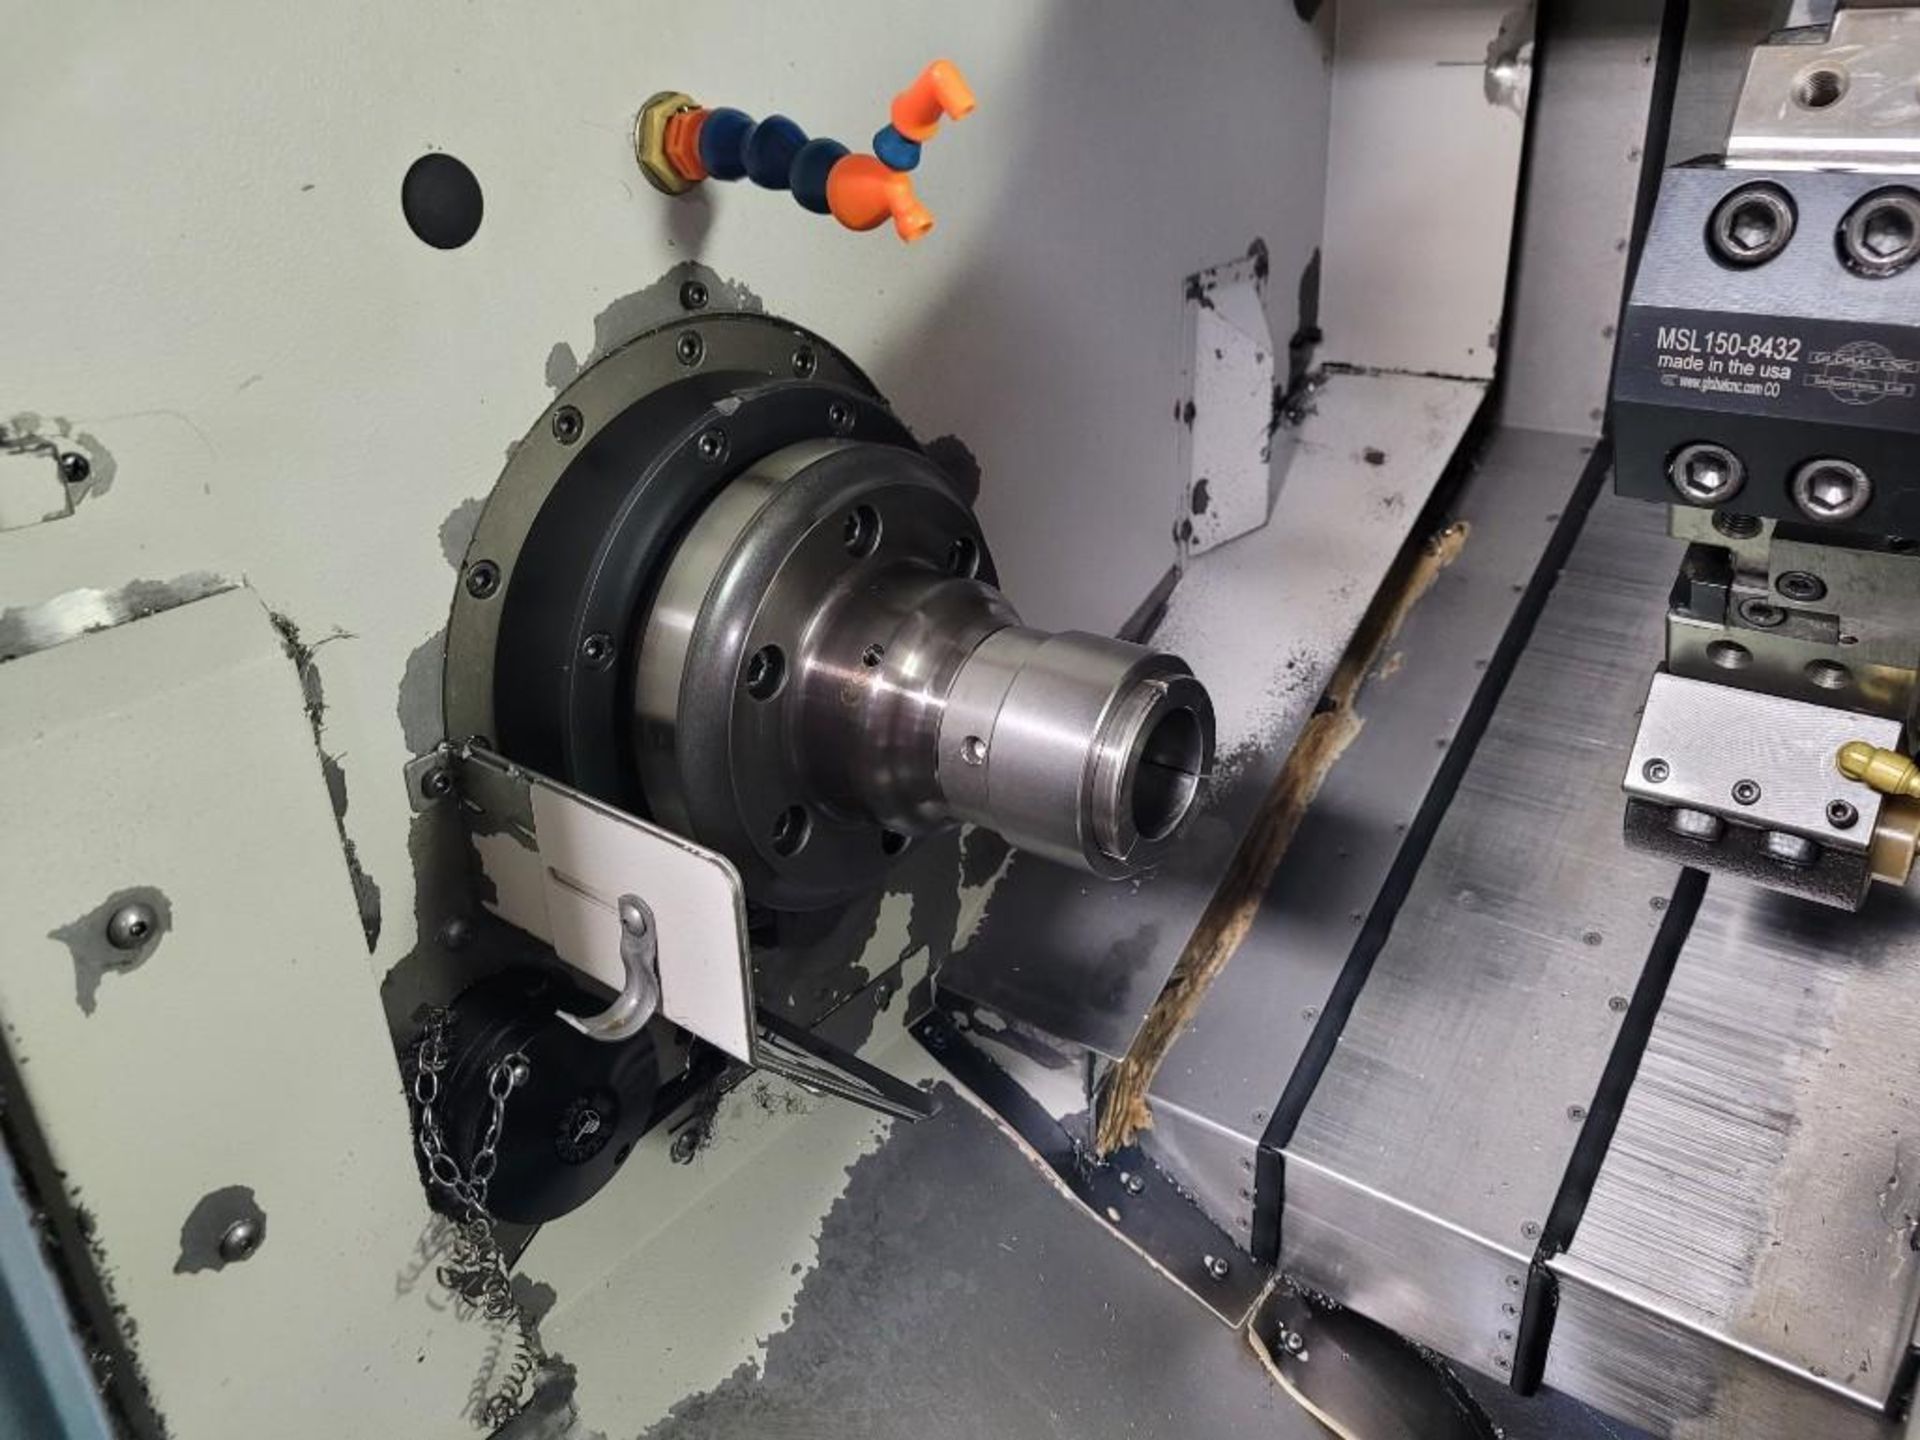 Mori Seiki CL-203B/500 CNC Turning Center, Updated Control (MAPPS 3), Collet Chuck, New 2001 - Image 7 of 13